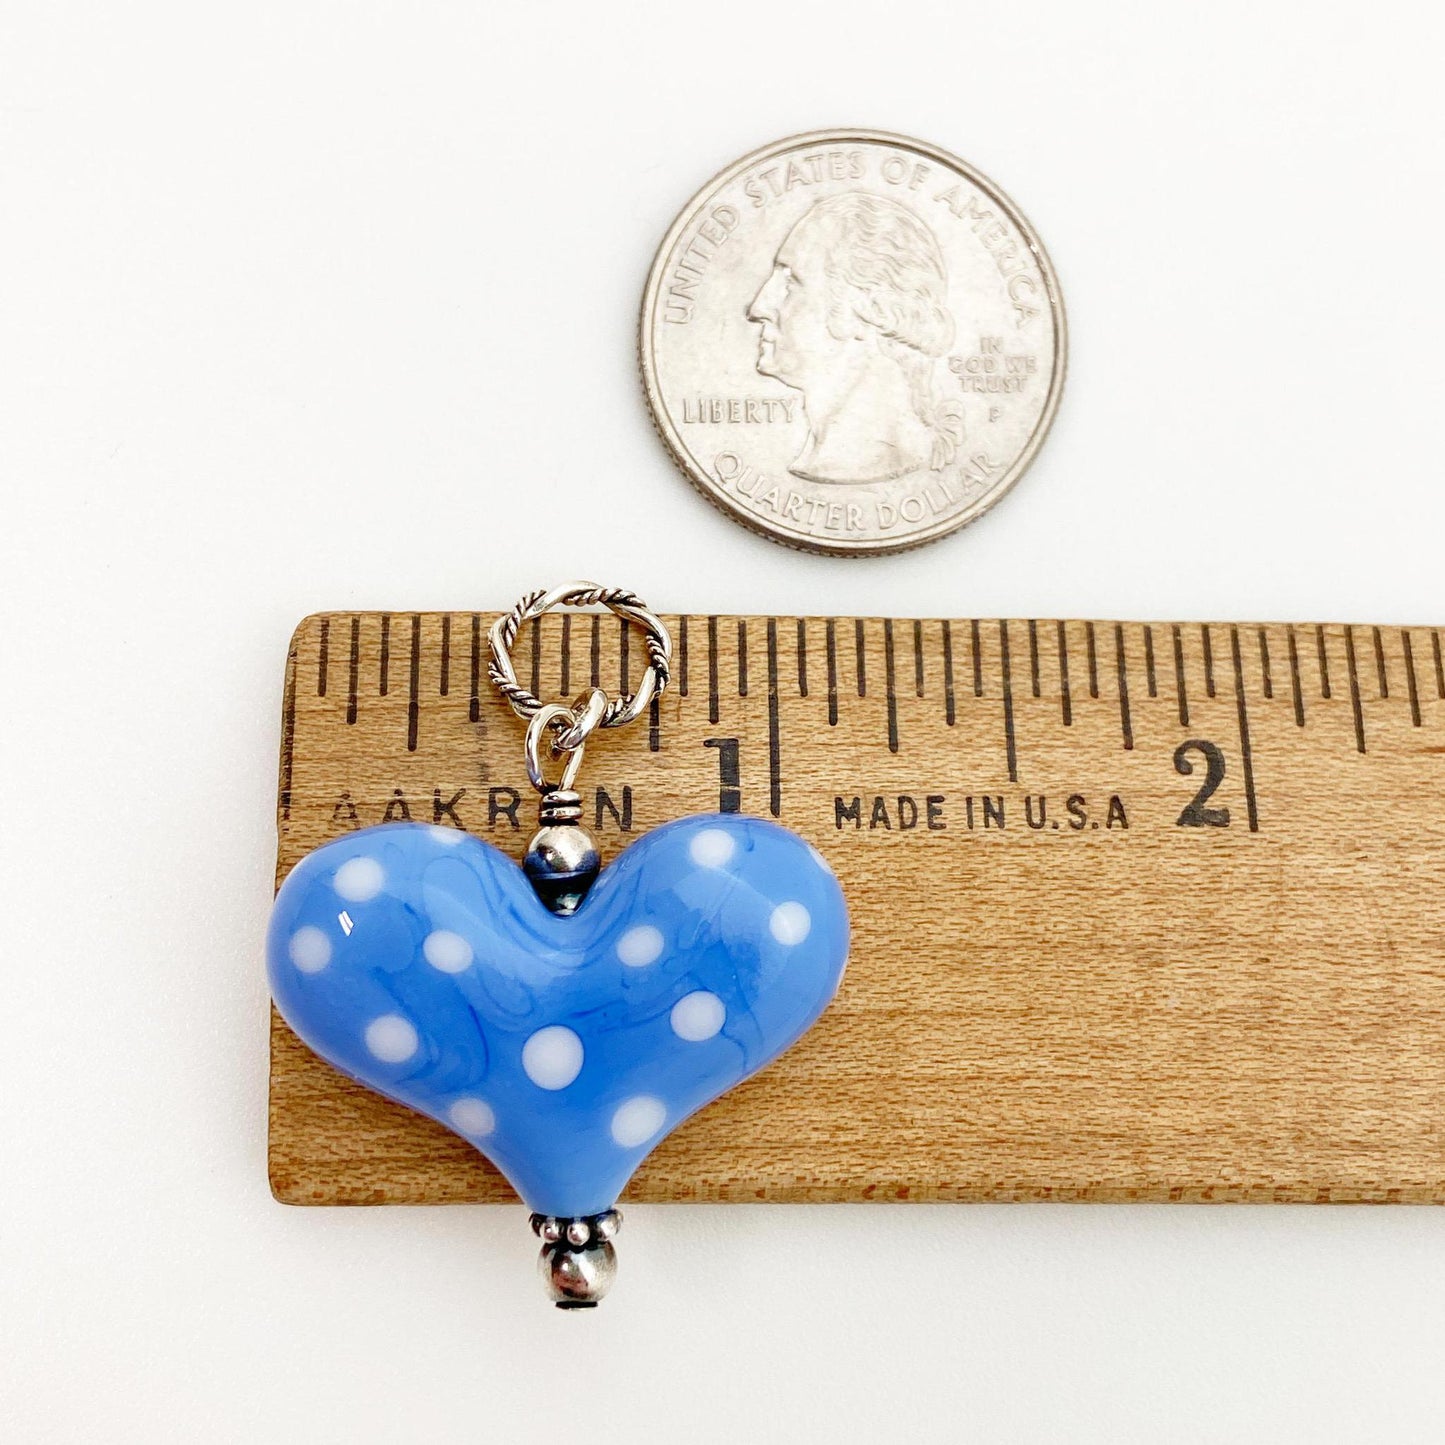 Pendant - Periwinkle Heart with White Polka Dots - Original Glass - Small